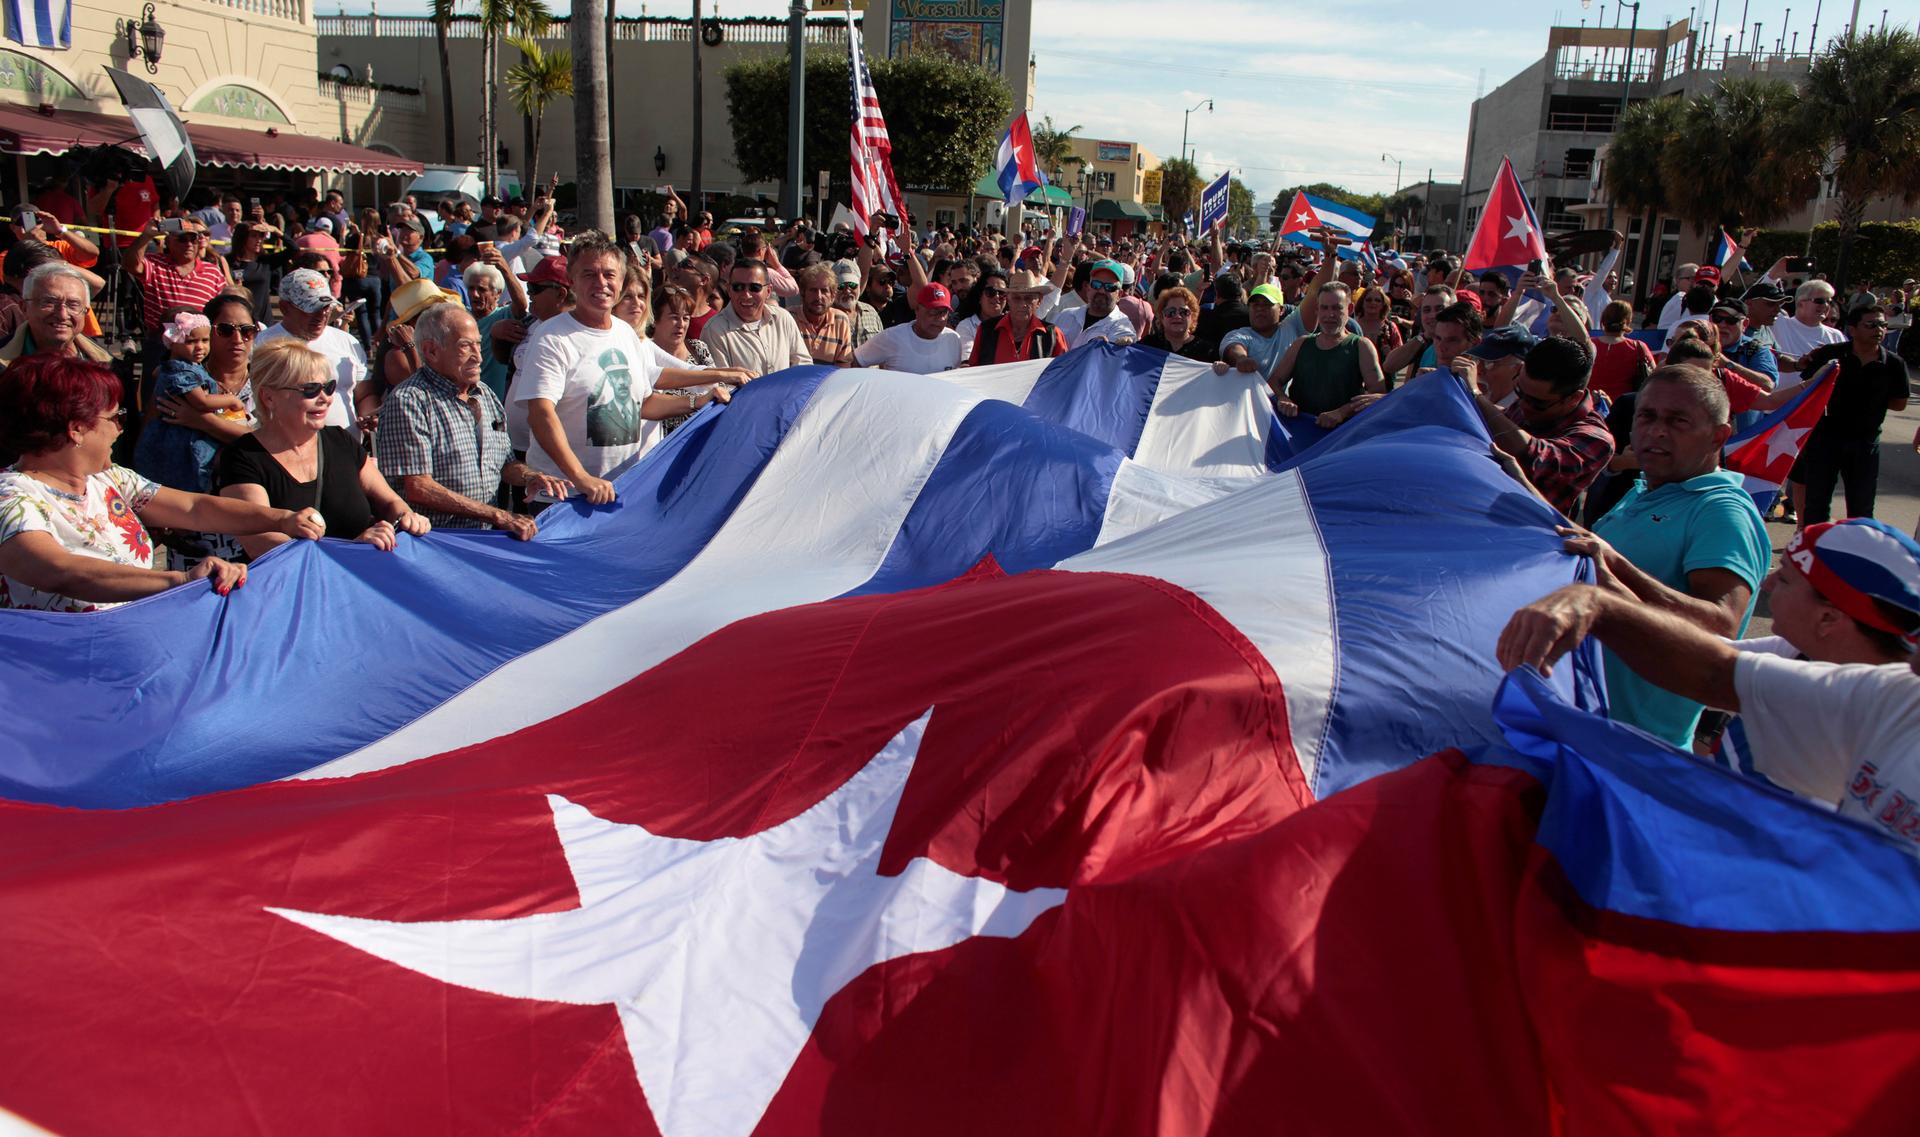 People celebrate after the announcement of the death of Cuban revolutionary leader Fidel Castro in the Little Havana district of Miami, Florida, U.S., November 26, 2016.